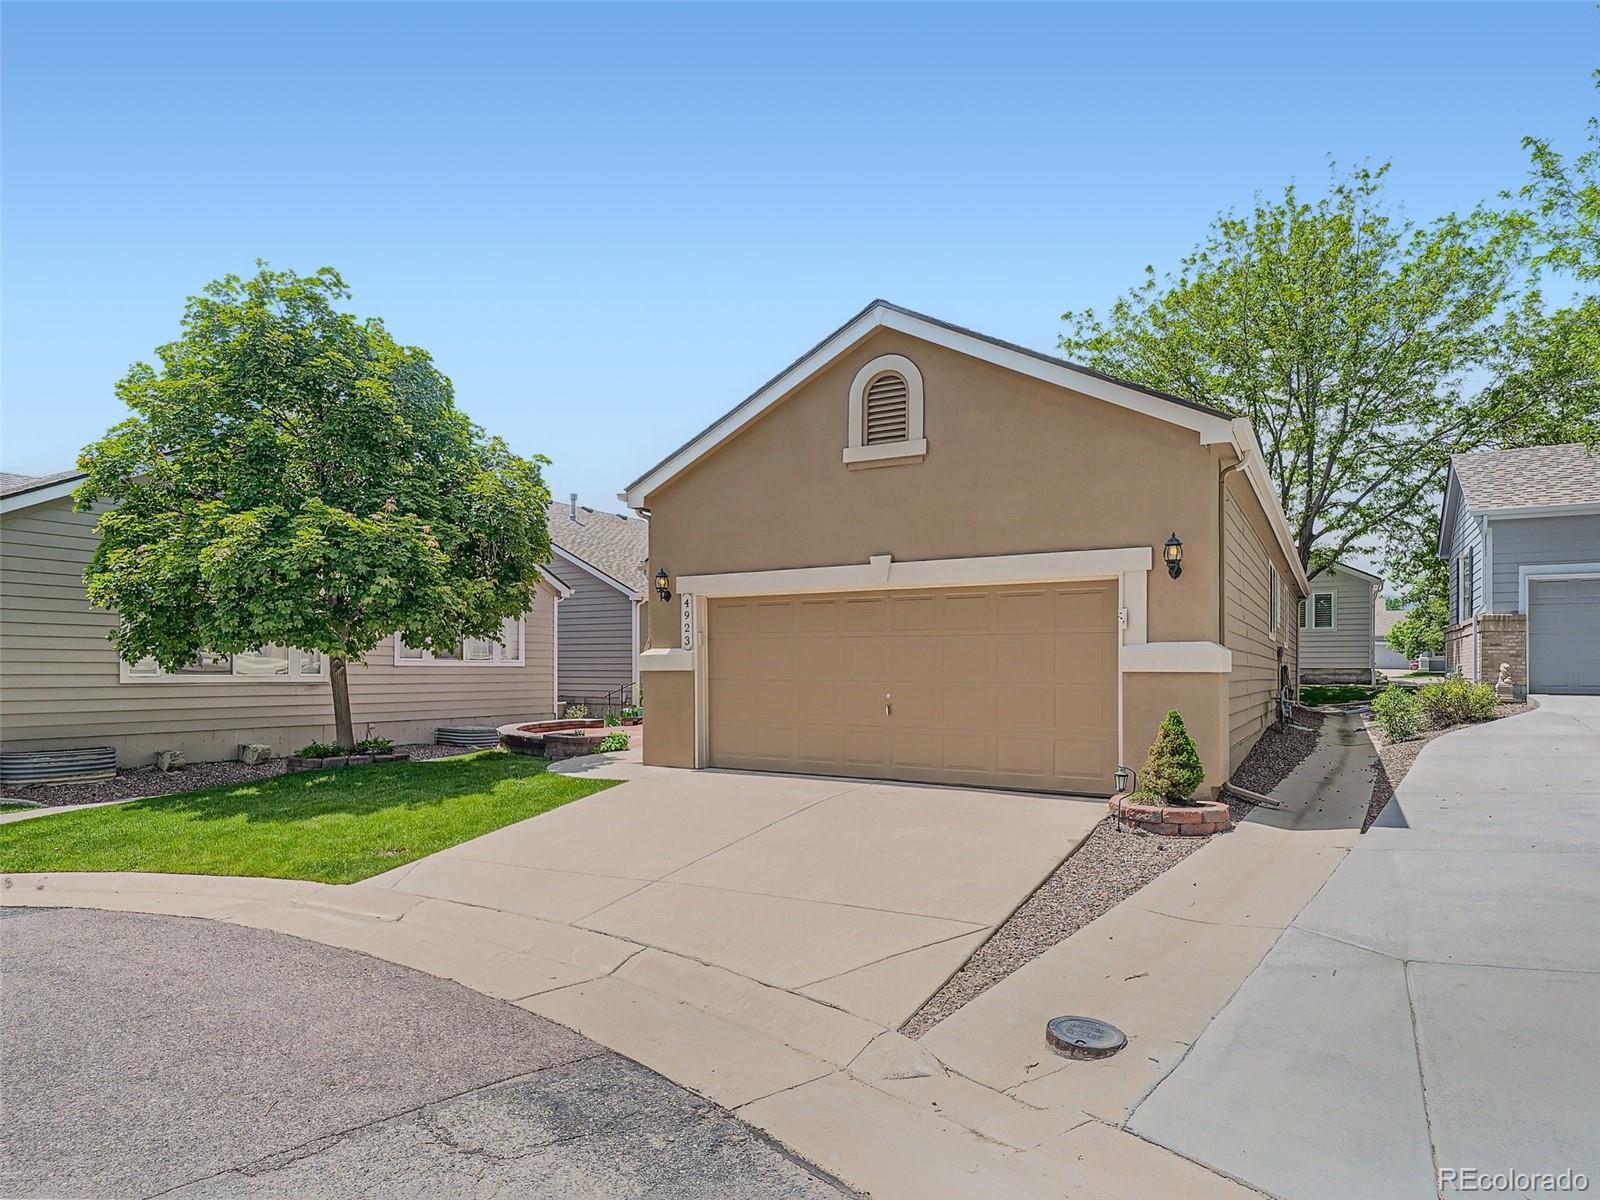 4923 s nelson court, Littleton sold home. Closed on 2024-03-22 for $595,000.